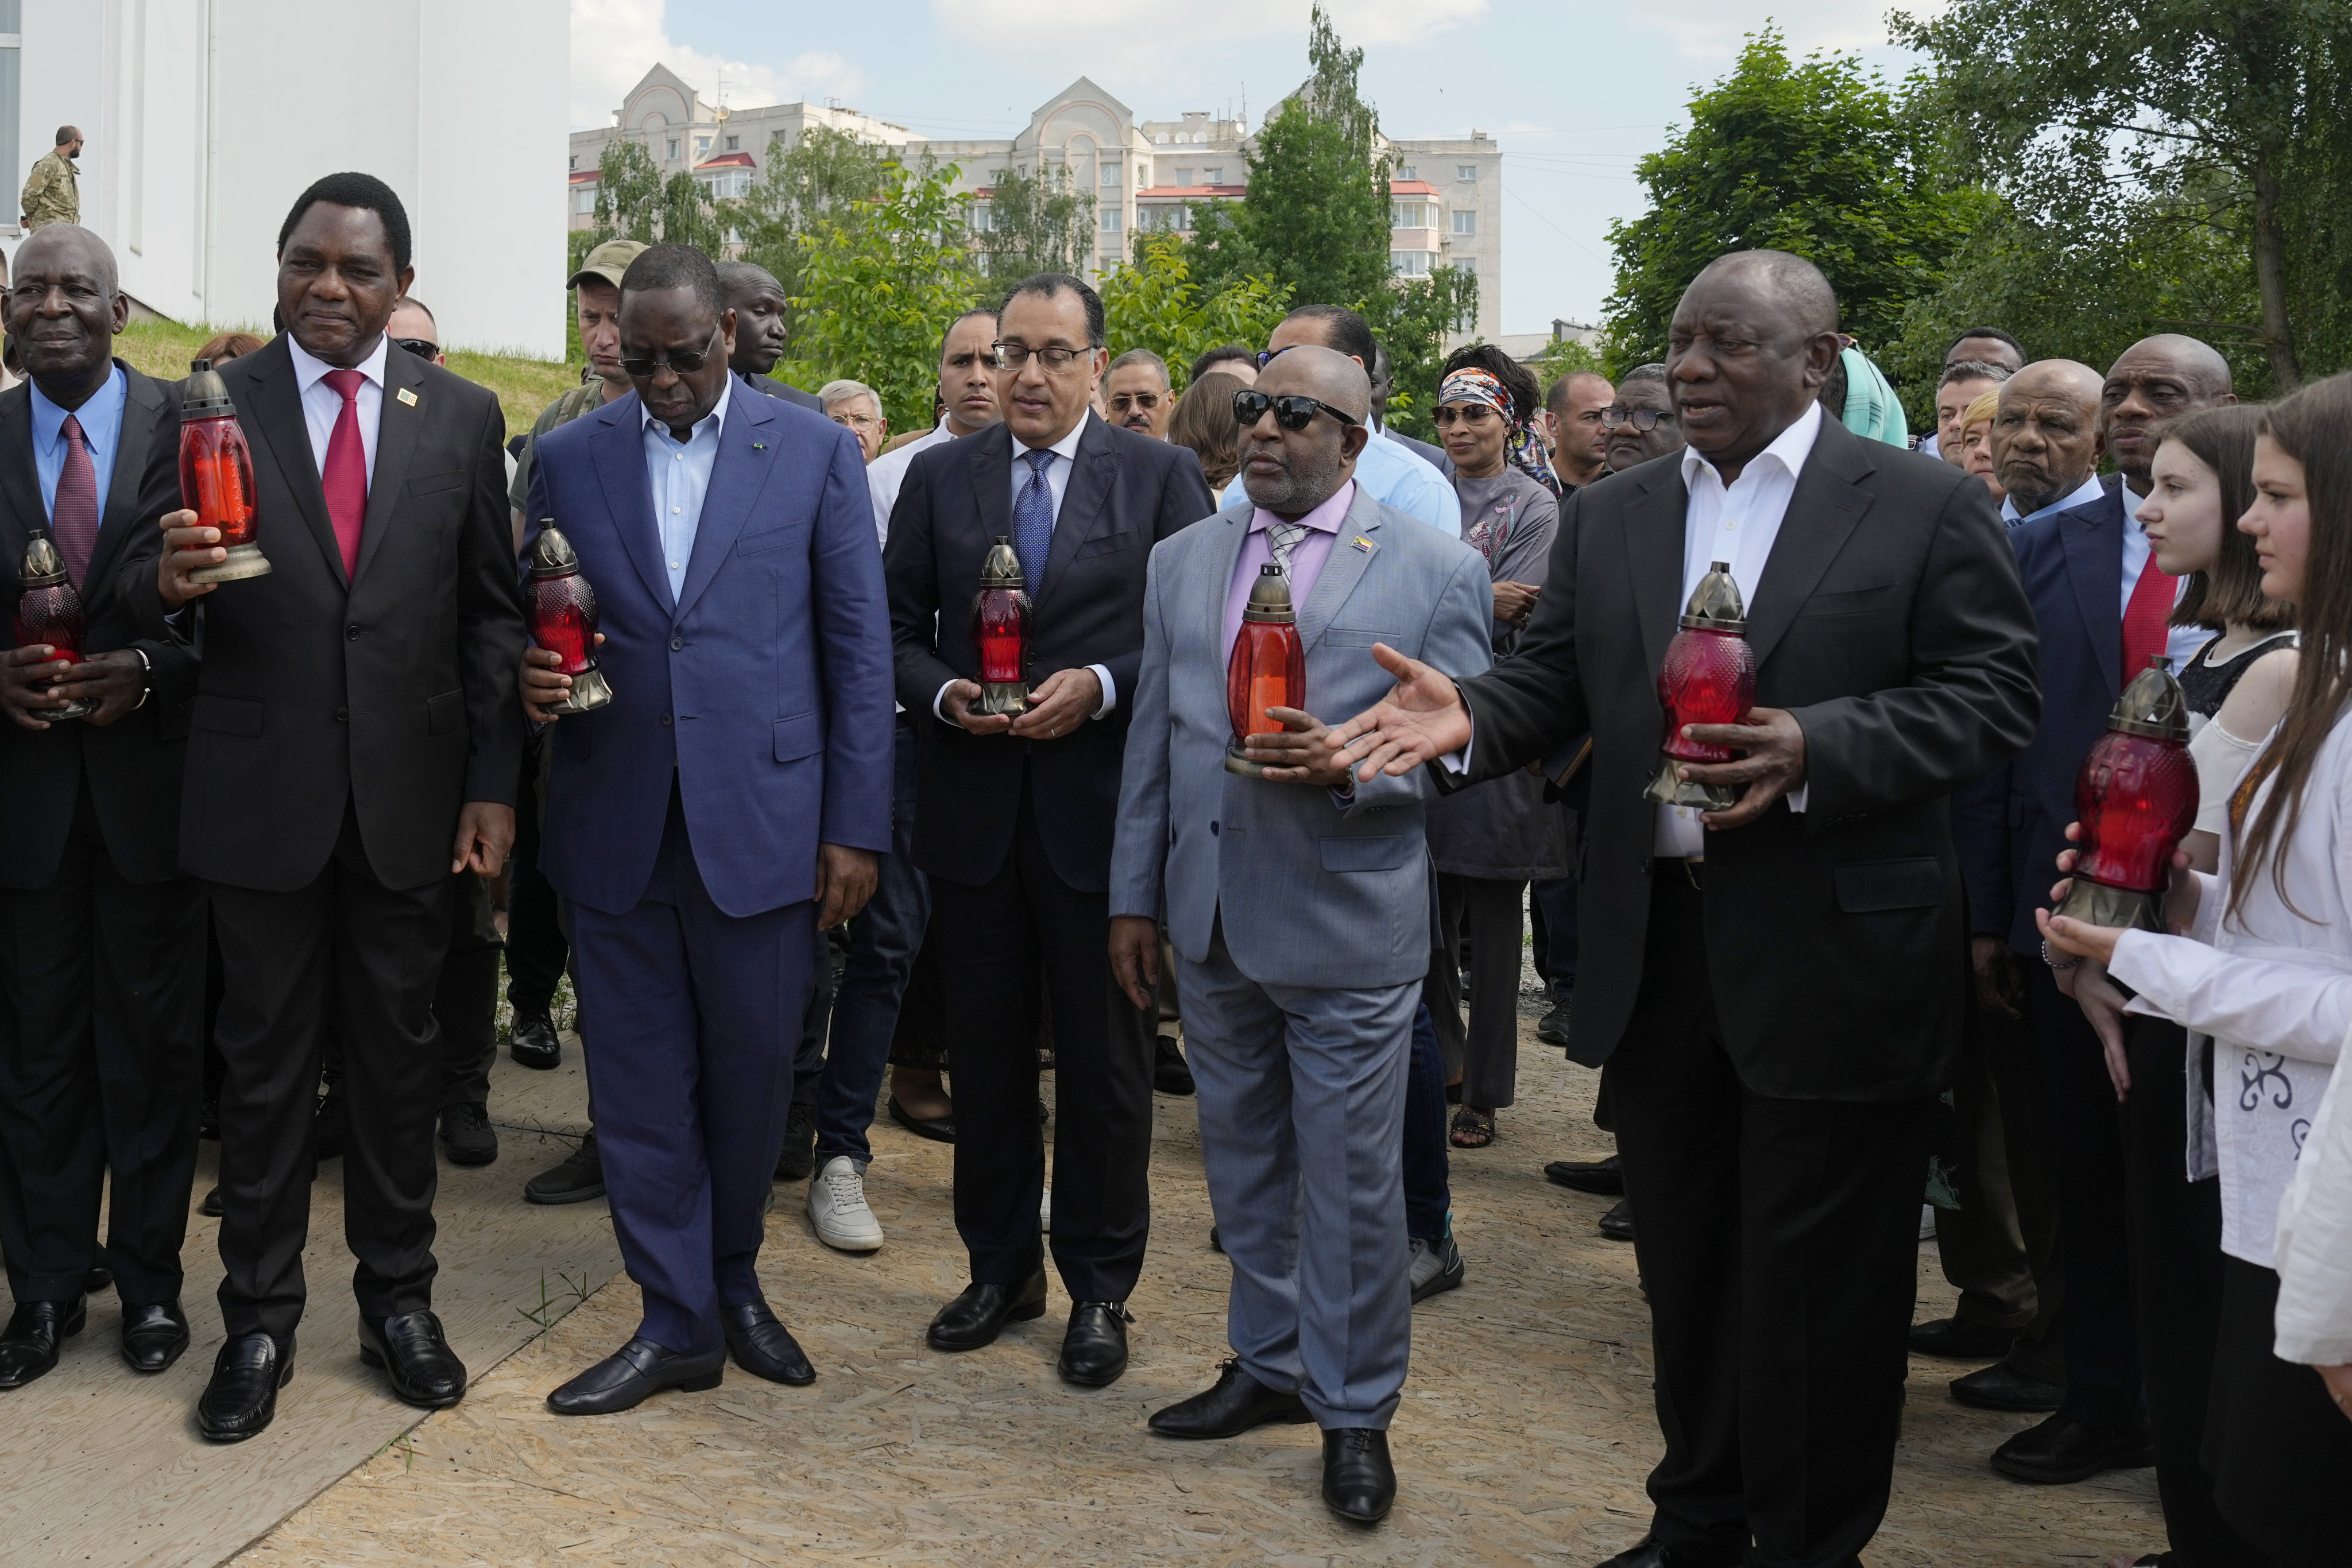 South African President Cyril Ramaphosa, Egypt’s Prime Minister Mustafa Madbuly, President of the Union of Comoros Azali Assoumani, Senegal’s President Macky Sall and Zambia’s President Hakainde Hichilema attend a commemoration ceremony at a site of a mass grave in Bucha, on the outskirts of Kyiv, Ukraine. Photo: AP